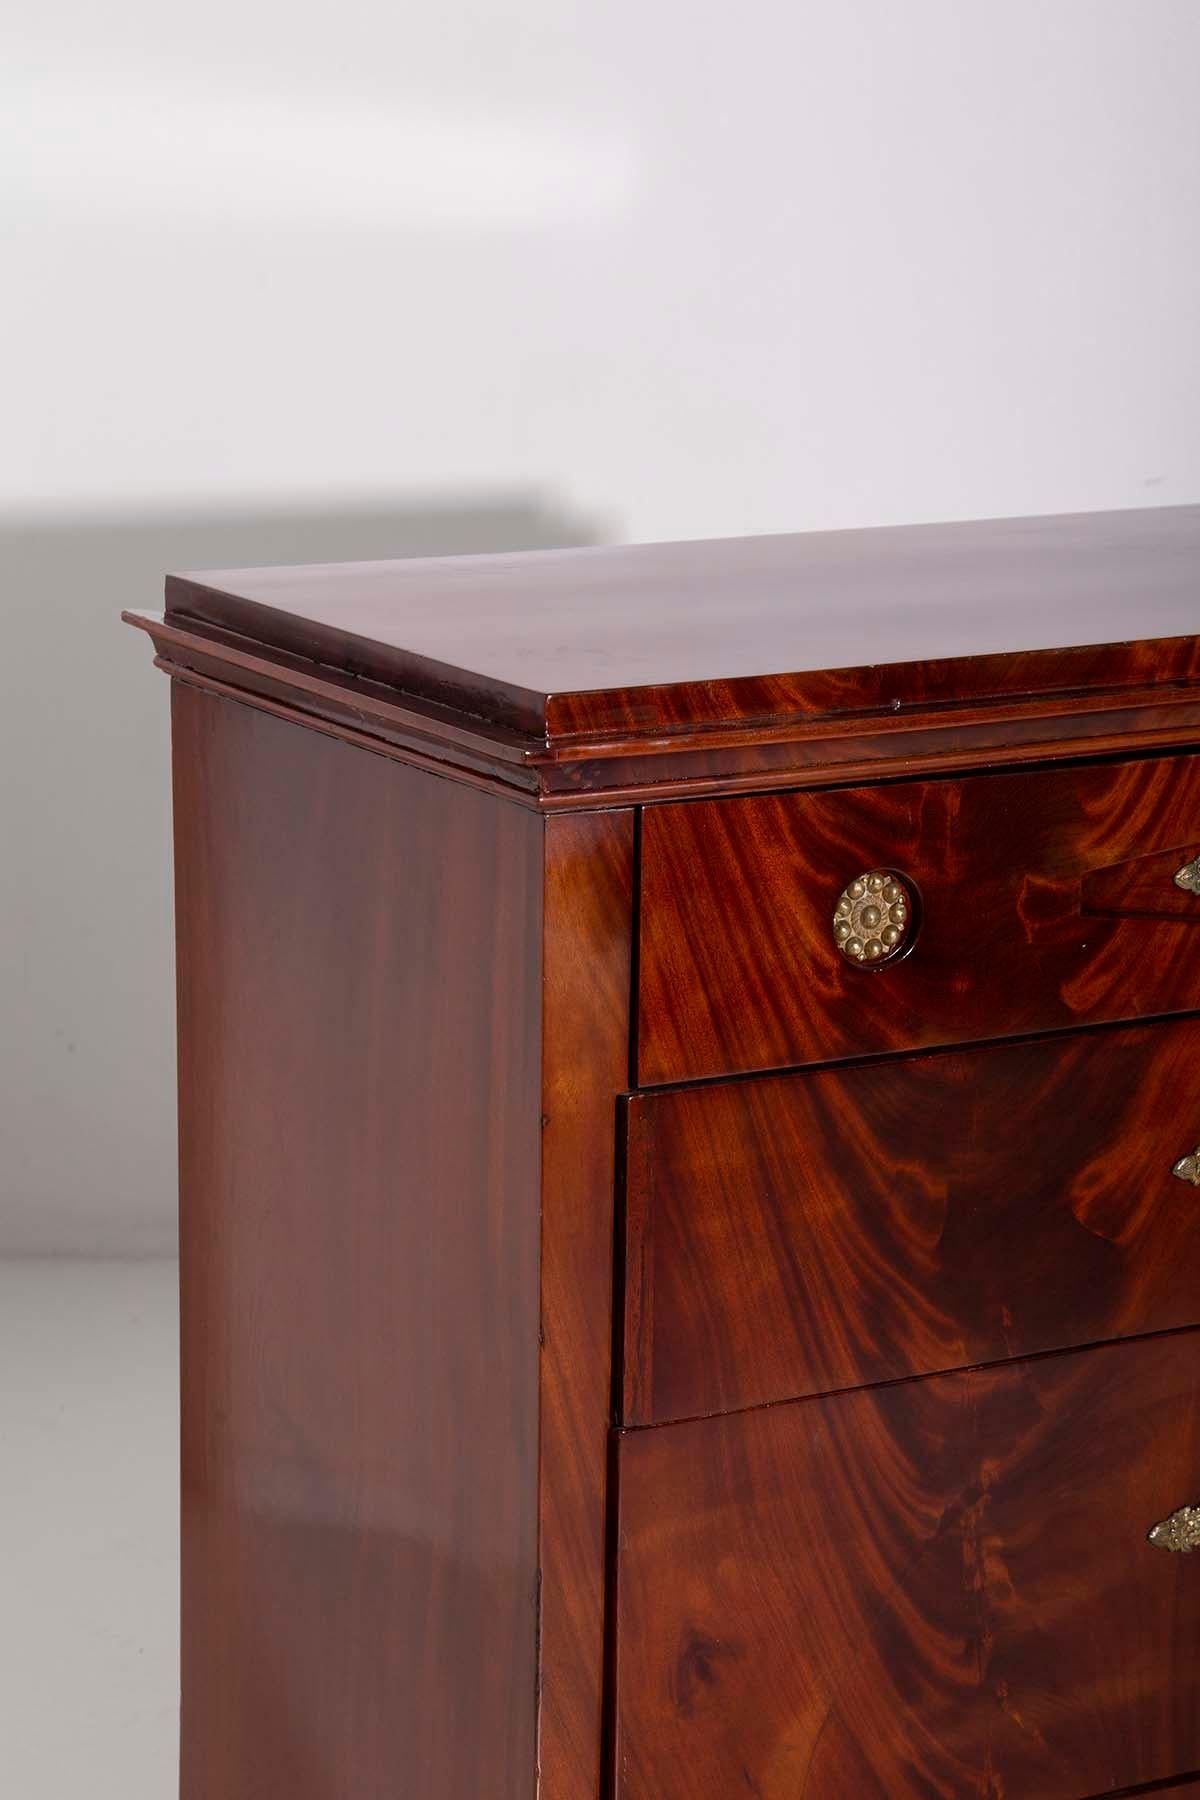 This marvelous Biedermeier-style drop-front secretary chest, dating back to around 1830 and crafted in Austria, is a true work of art. Made from precious mahogany wood, it features breathtaking grain patterns that create a magnificent visual